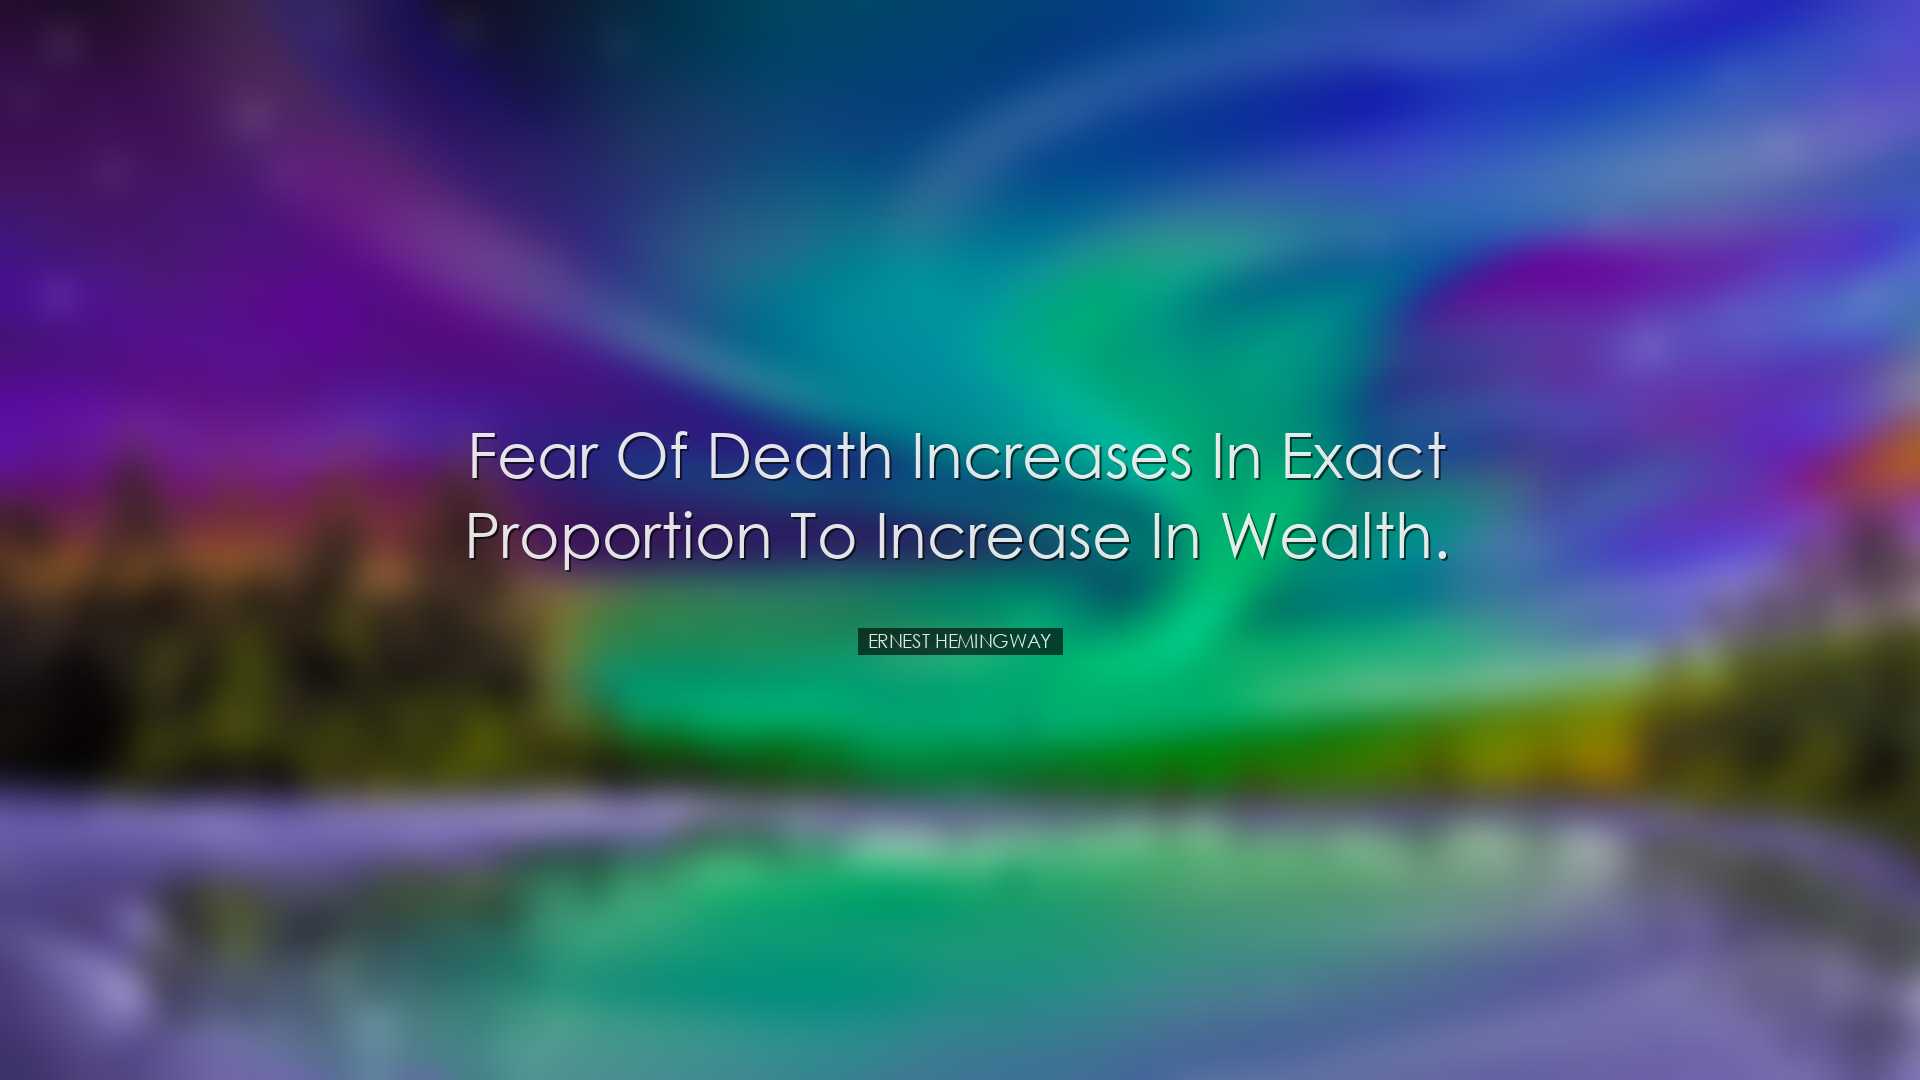 Fear of death increases in exact proportion to increase in wealth.